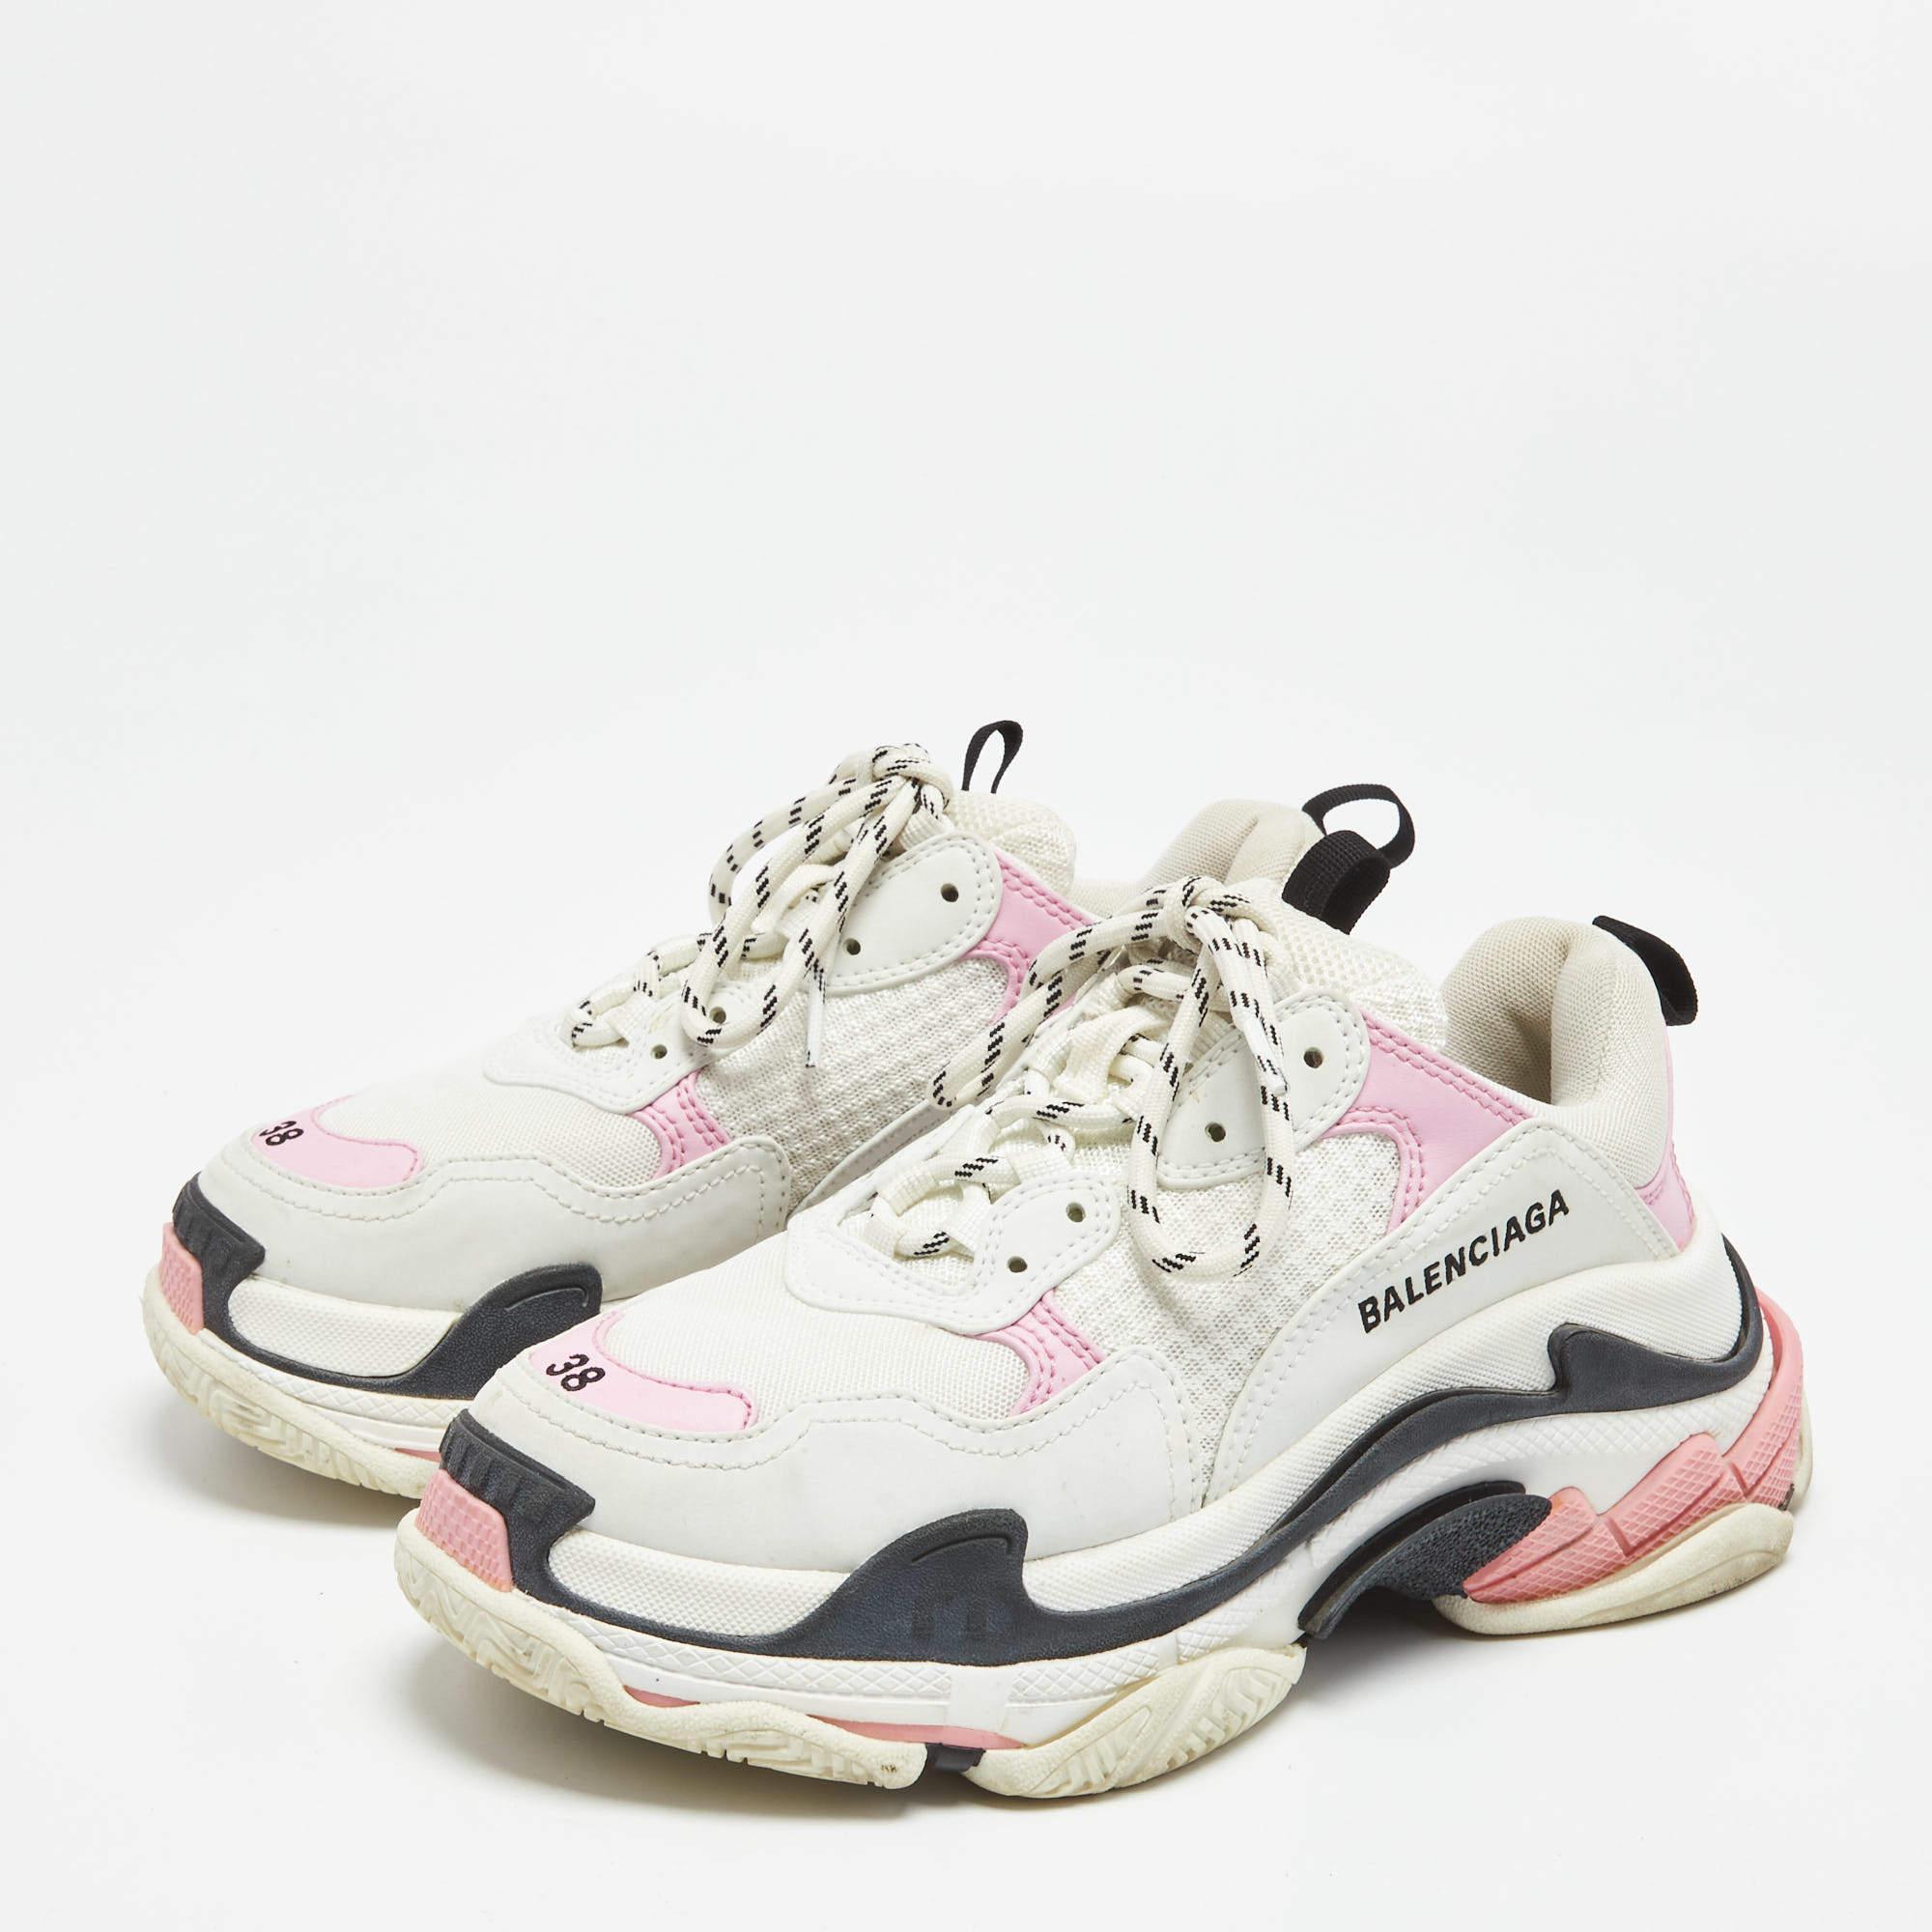 Women's Balenciaga White/Pink Leather and Mesh Triple S Sneakers Size 38